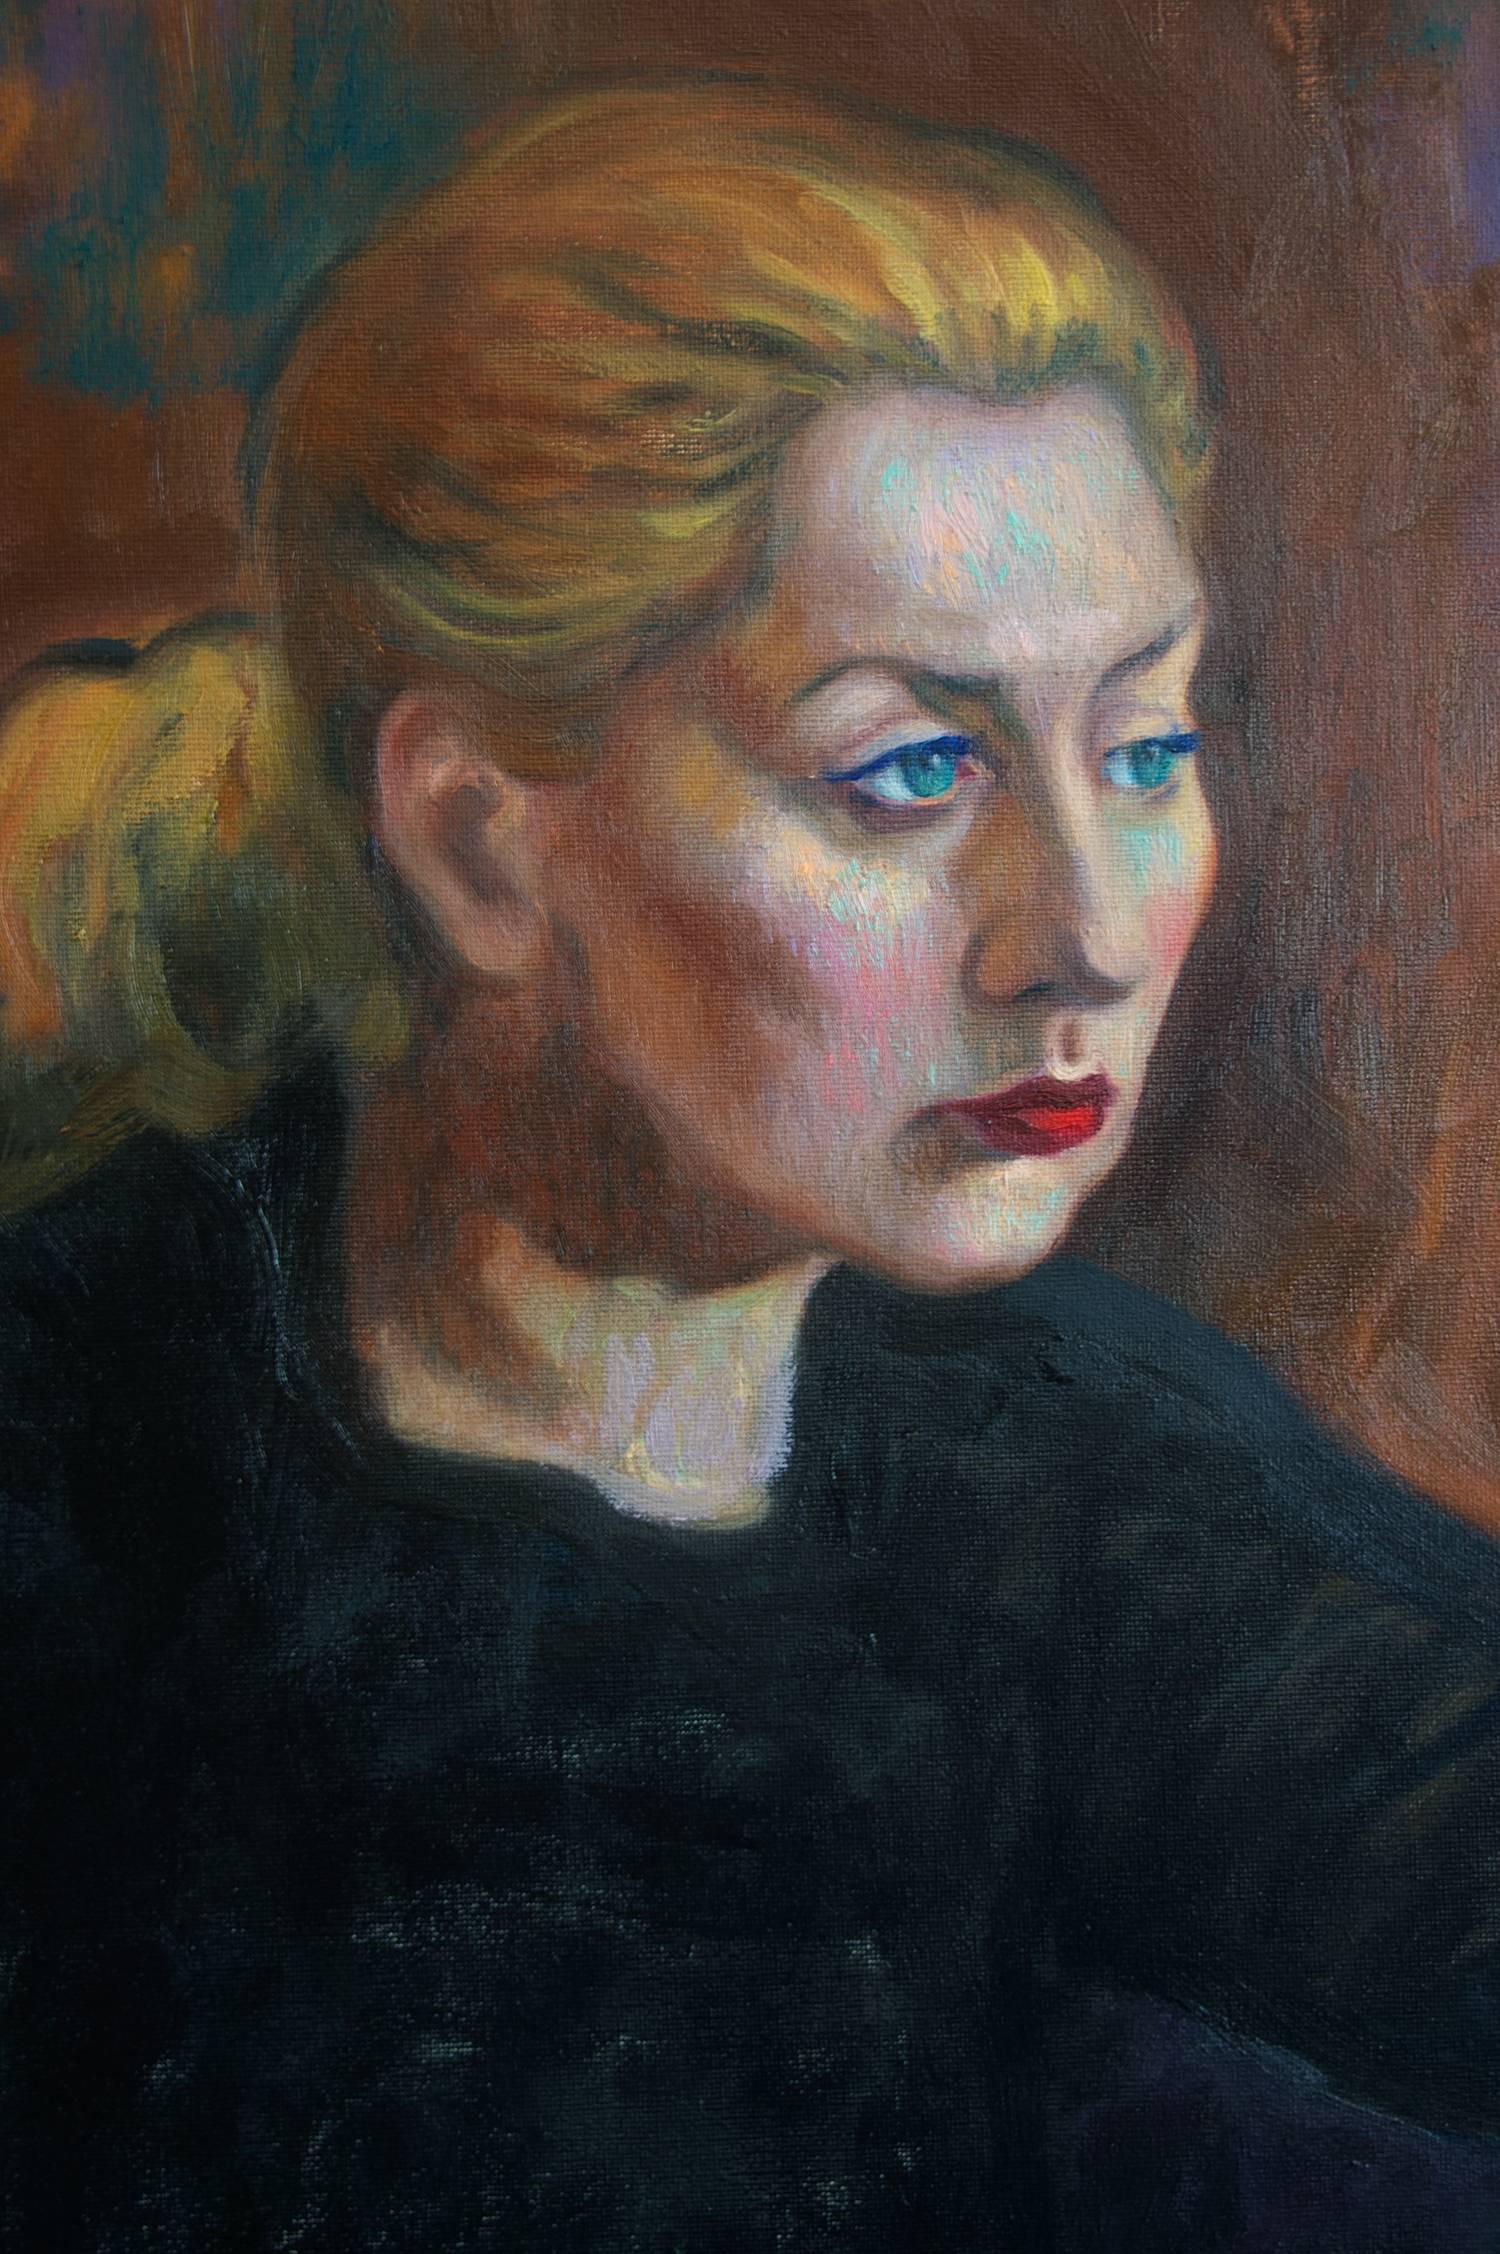 Title: The Witch
Artist: Elina Arbidane (emerging contemporary impressionist painter), Latvia.
Original hand-painted portrait of a woman in black.
Oil paints on canvas.
Not a print or copy, only one available.
Signed on the front.
Measures: